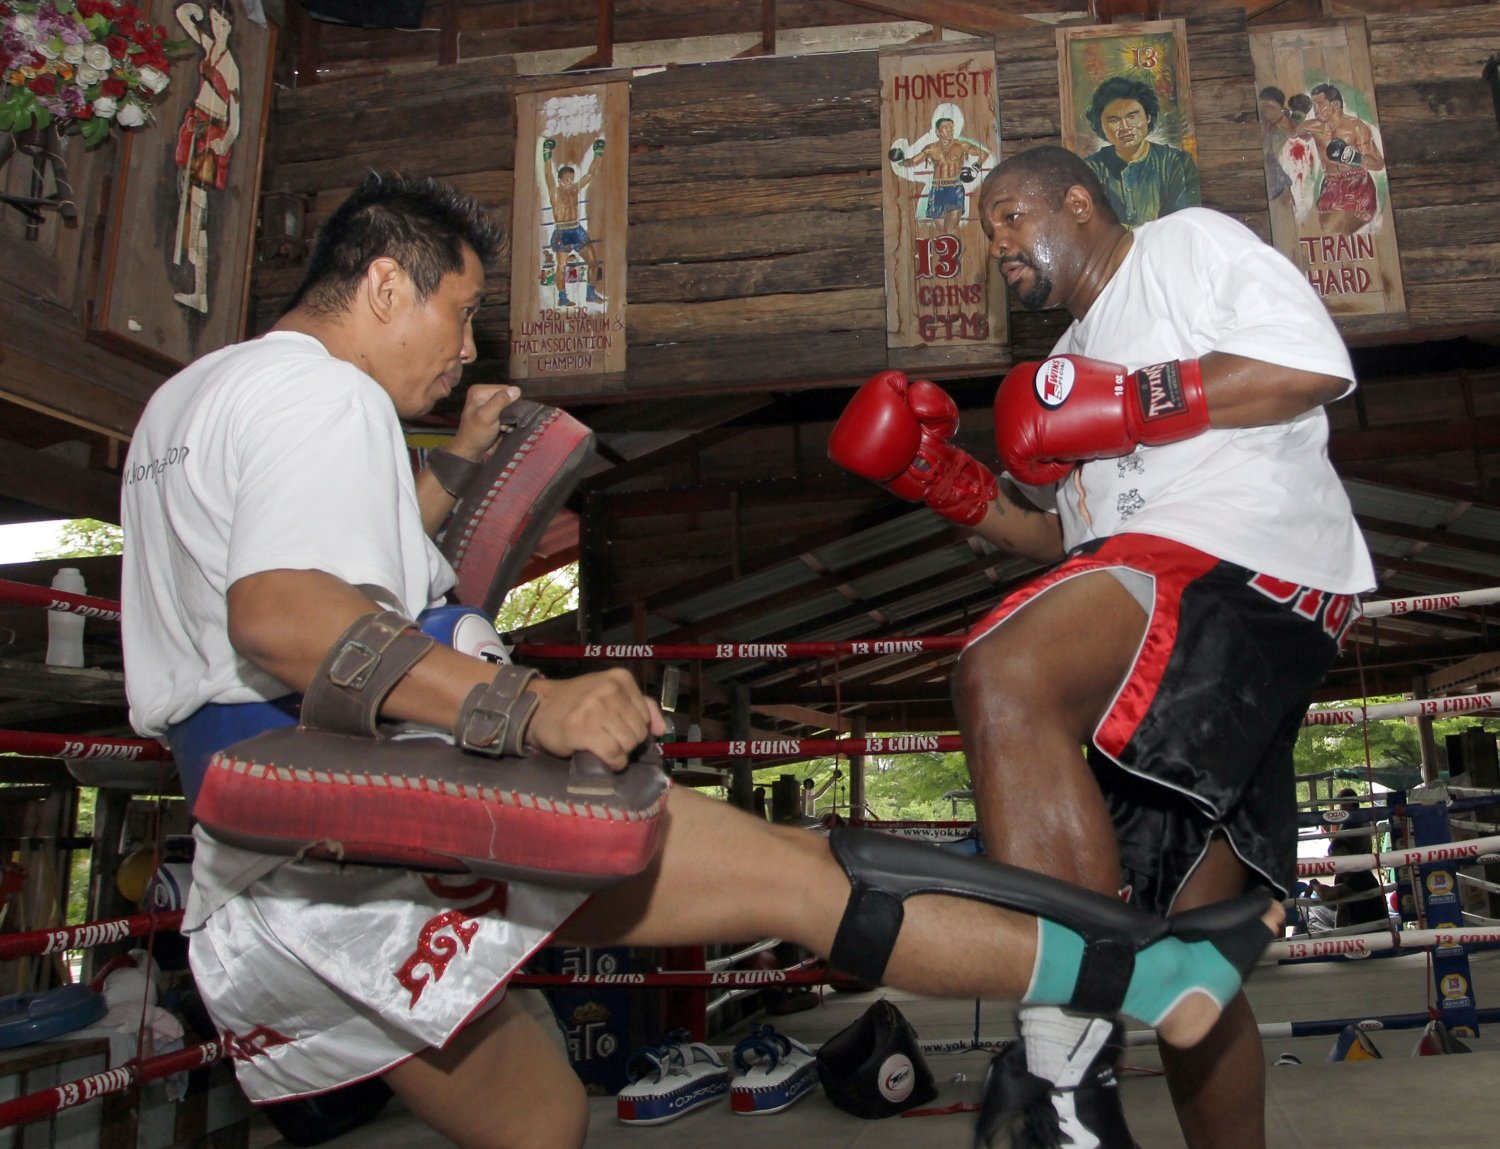 Former world heavyweight boxing champion Riddick Bowe of the US, right, trains a Muay Thai with his Thai partner at a gym in Bangkok, Thailand. Photo: AFP